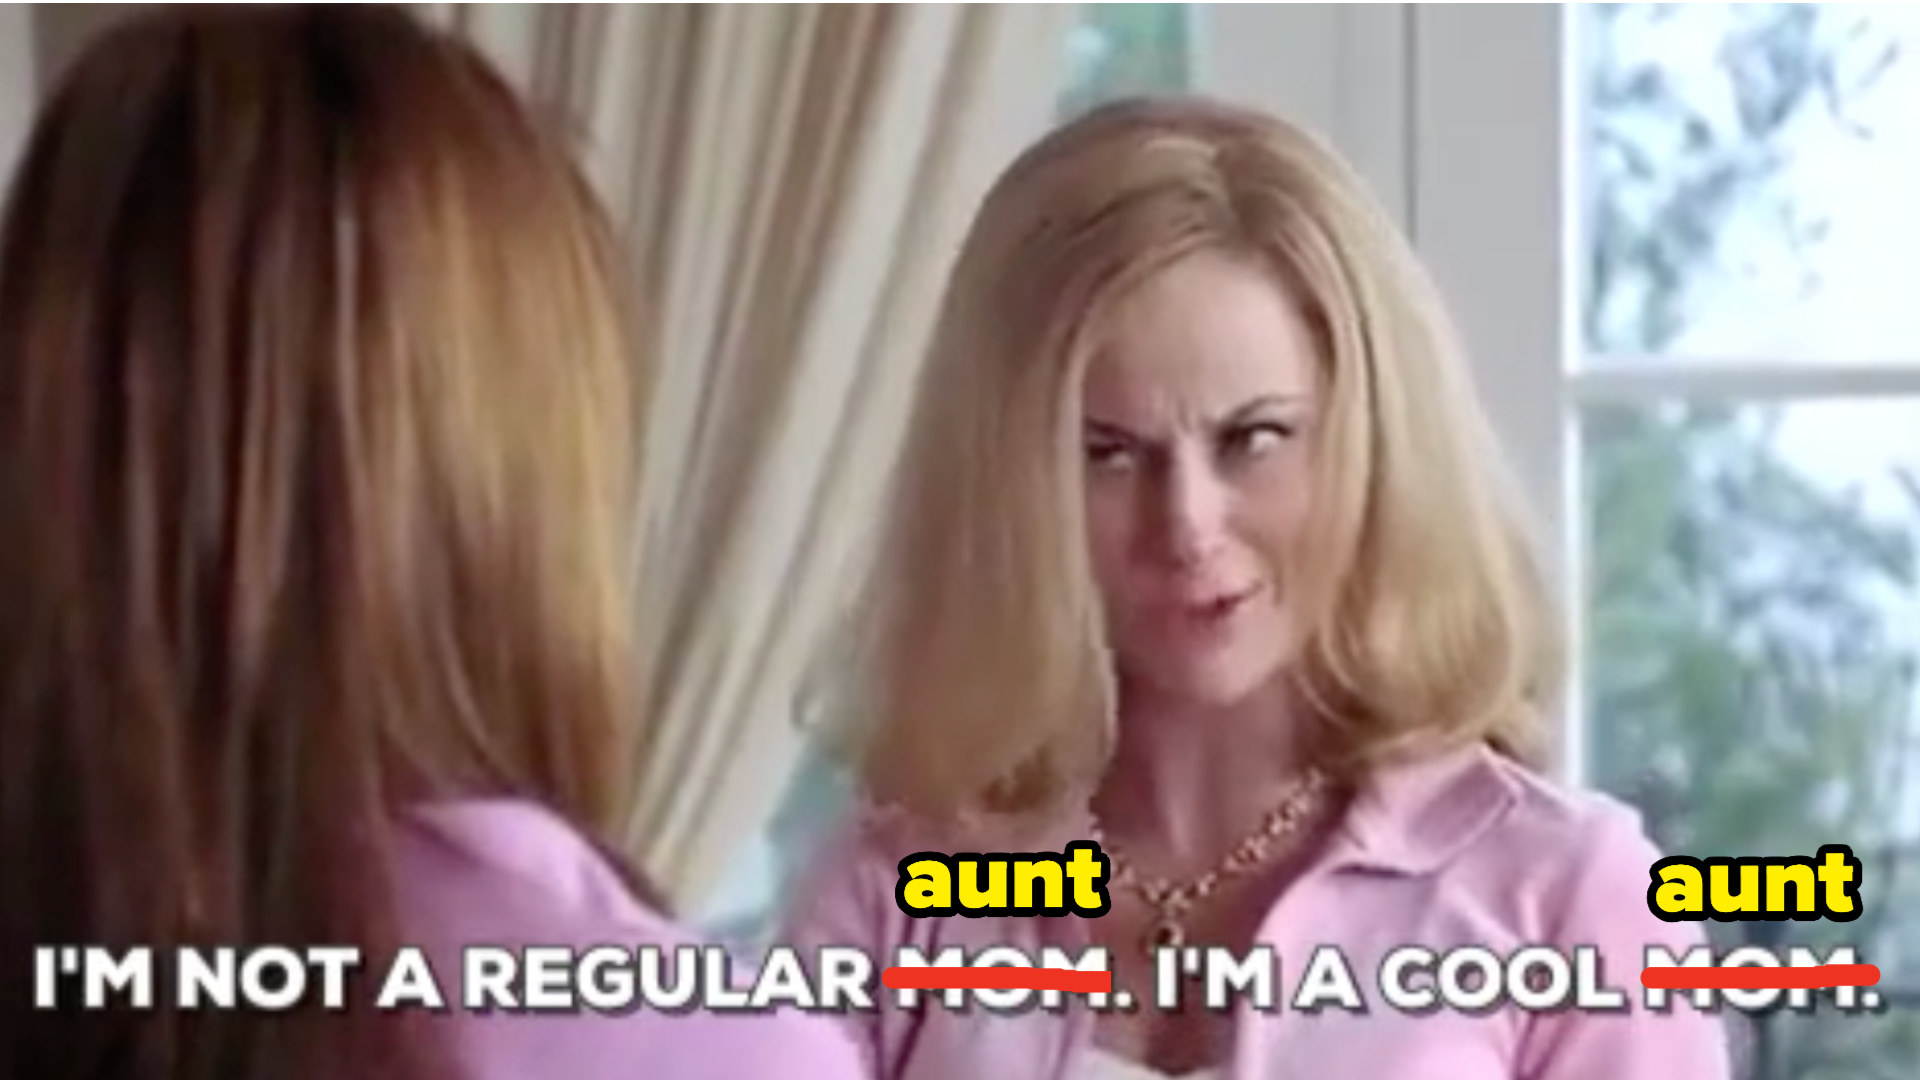 Regina George&#x27;s mom&#x27;s famous &quot;cool mom&quot; quote, but edited to say &quot;I&#x27;m not a regular aunt, i&#x27;m a cool aunt&quot;